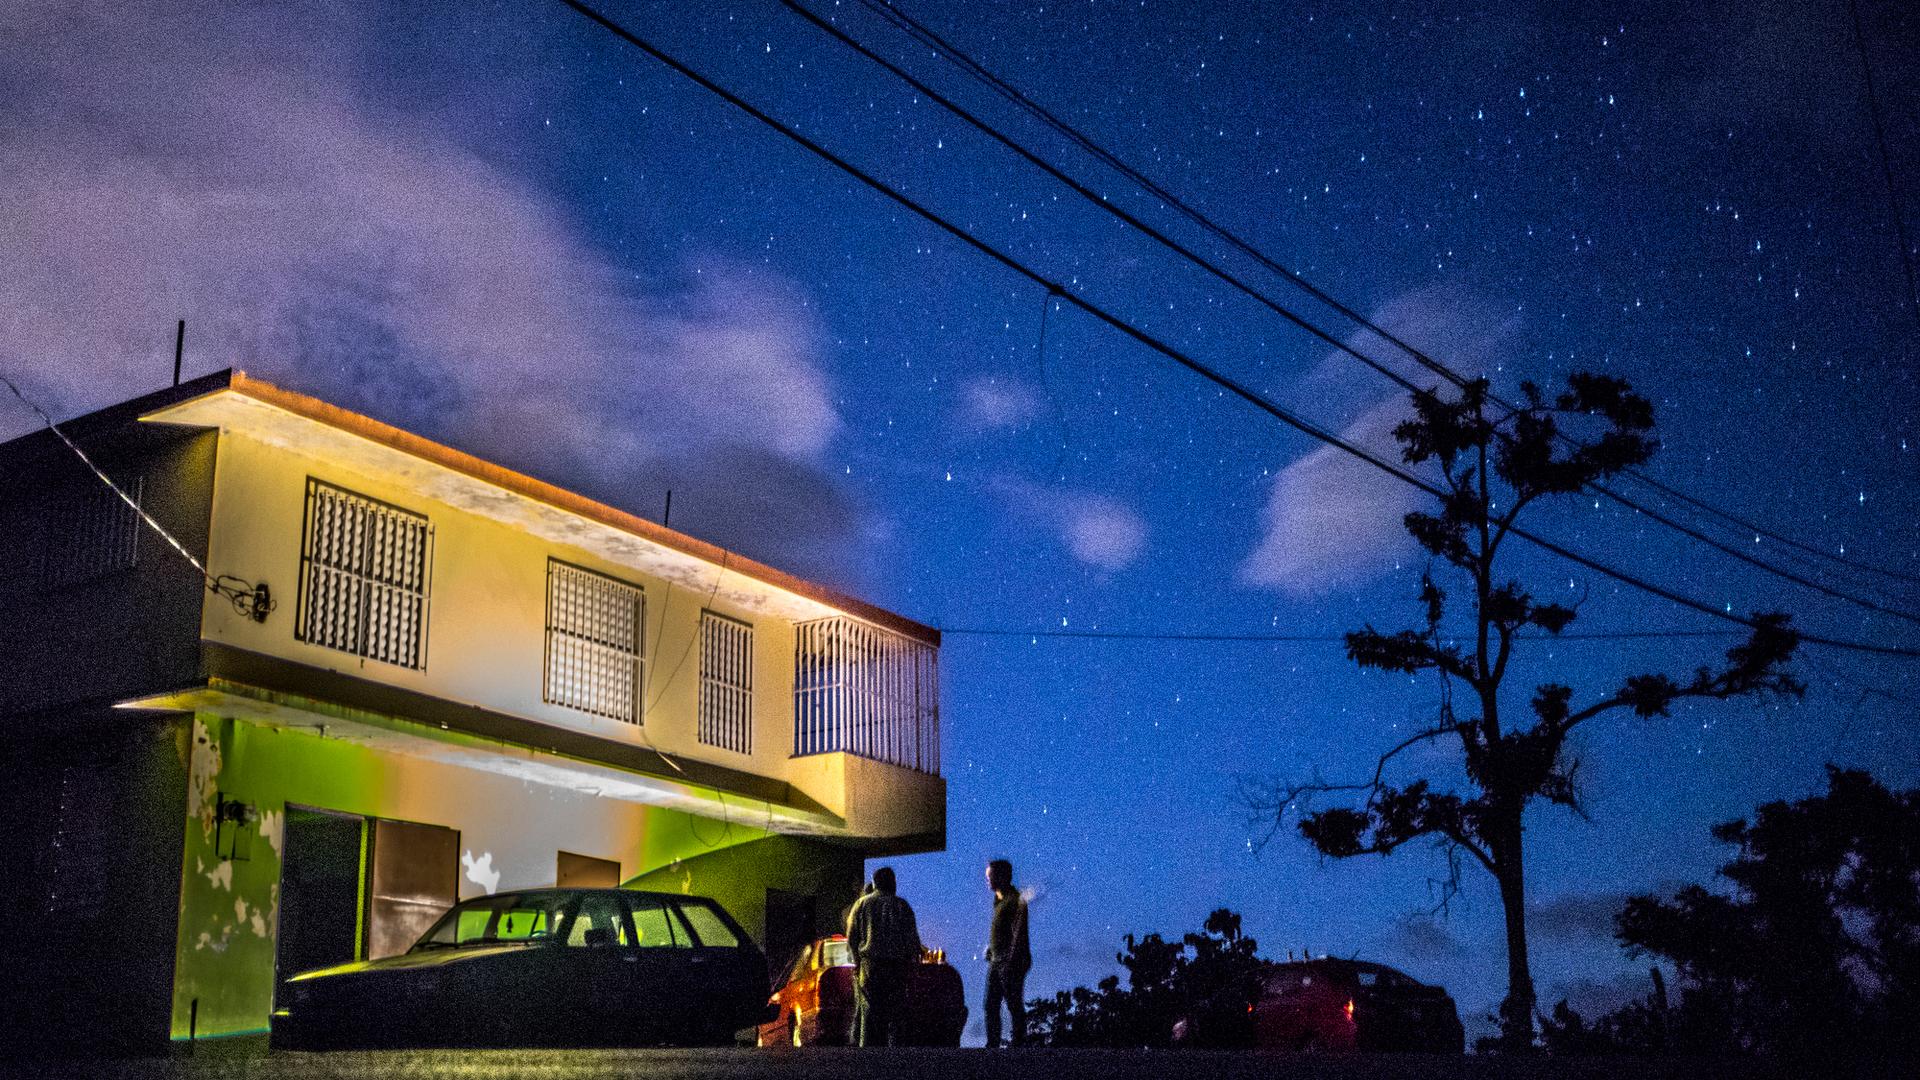 On Wednesday, the entire Island of Puerto Rico lost power. But before Wednesday's outage, after nearly eight months post-Hurricane Maria, 11 percent of the island was still living in darkness — including this apartment building in Coamo.`